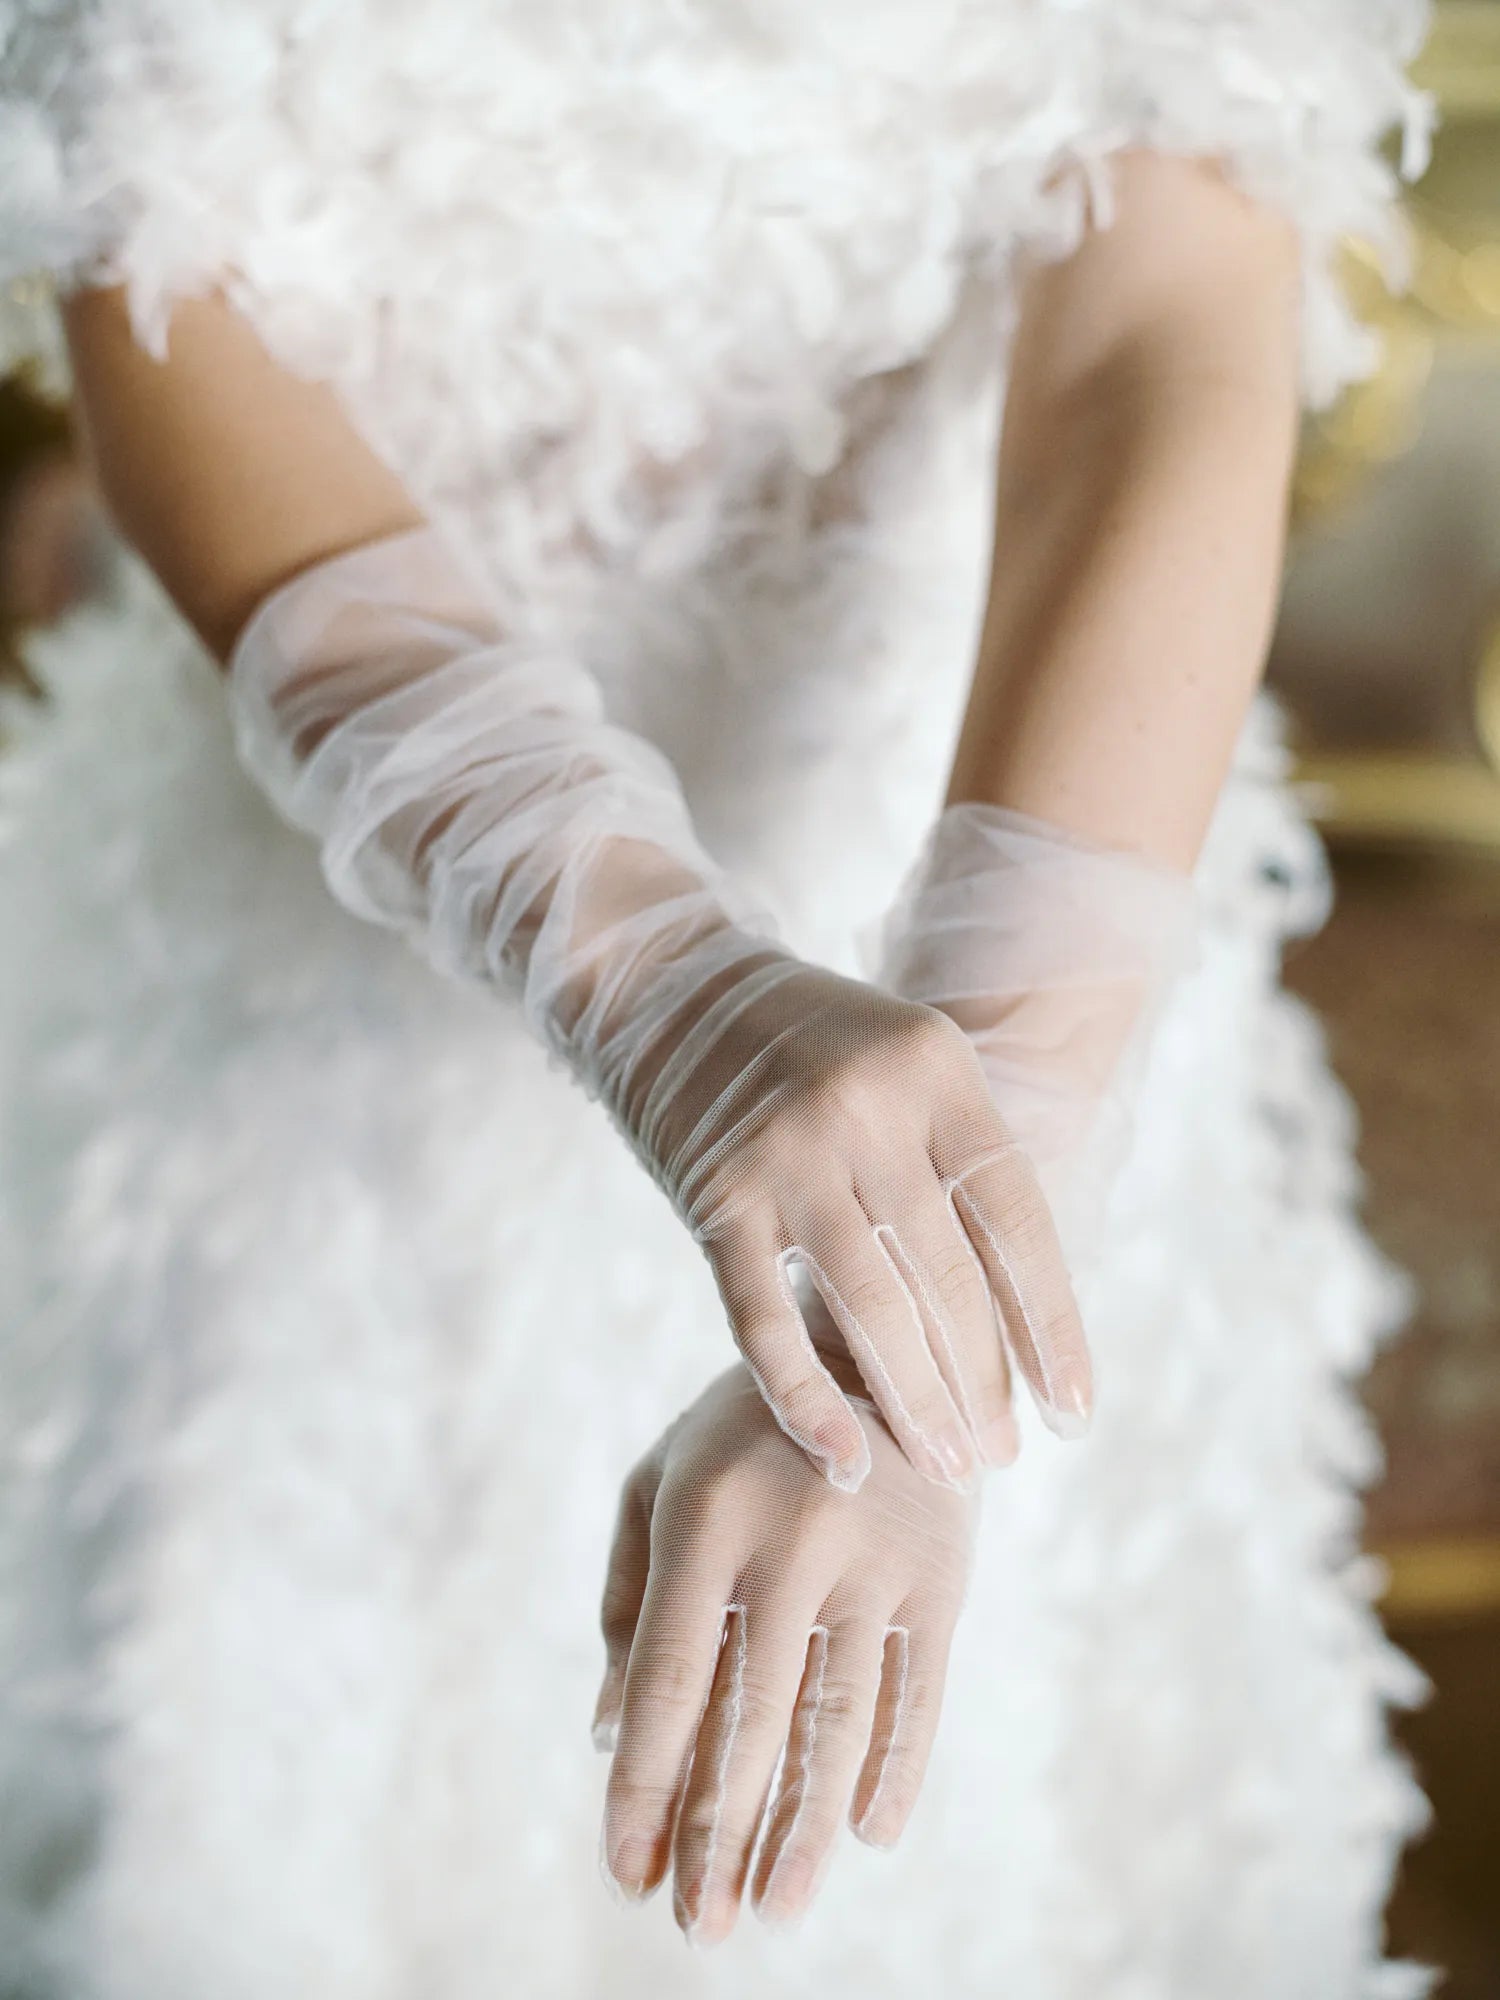 Woman in white dress, holding out hands wearing white fitted tulle gloves.